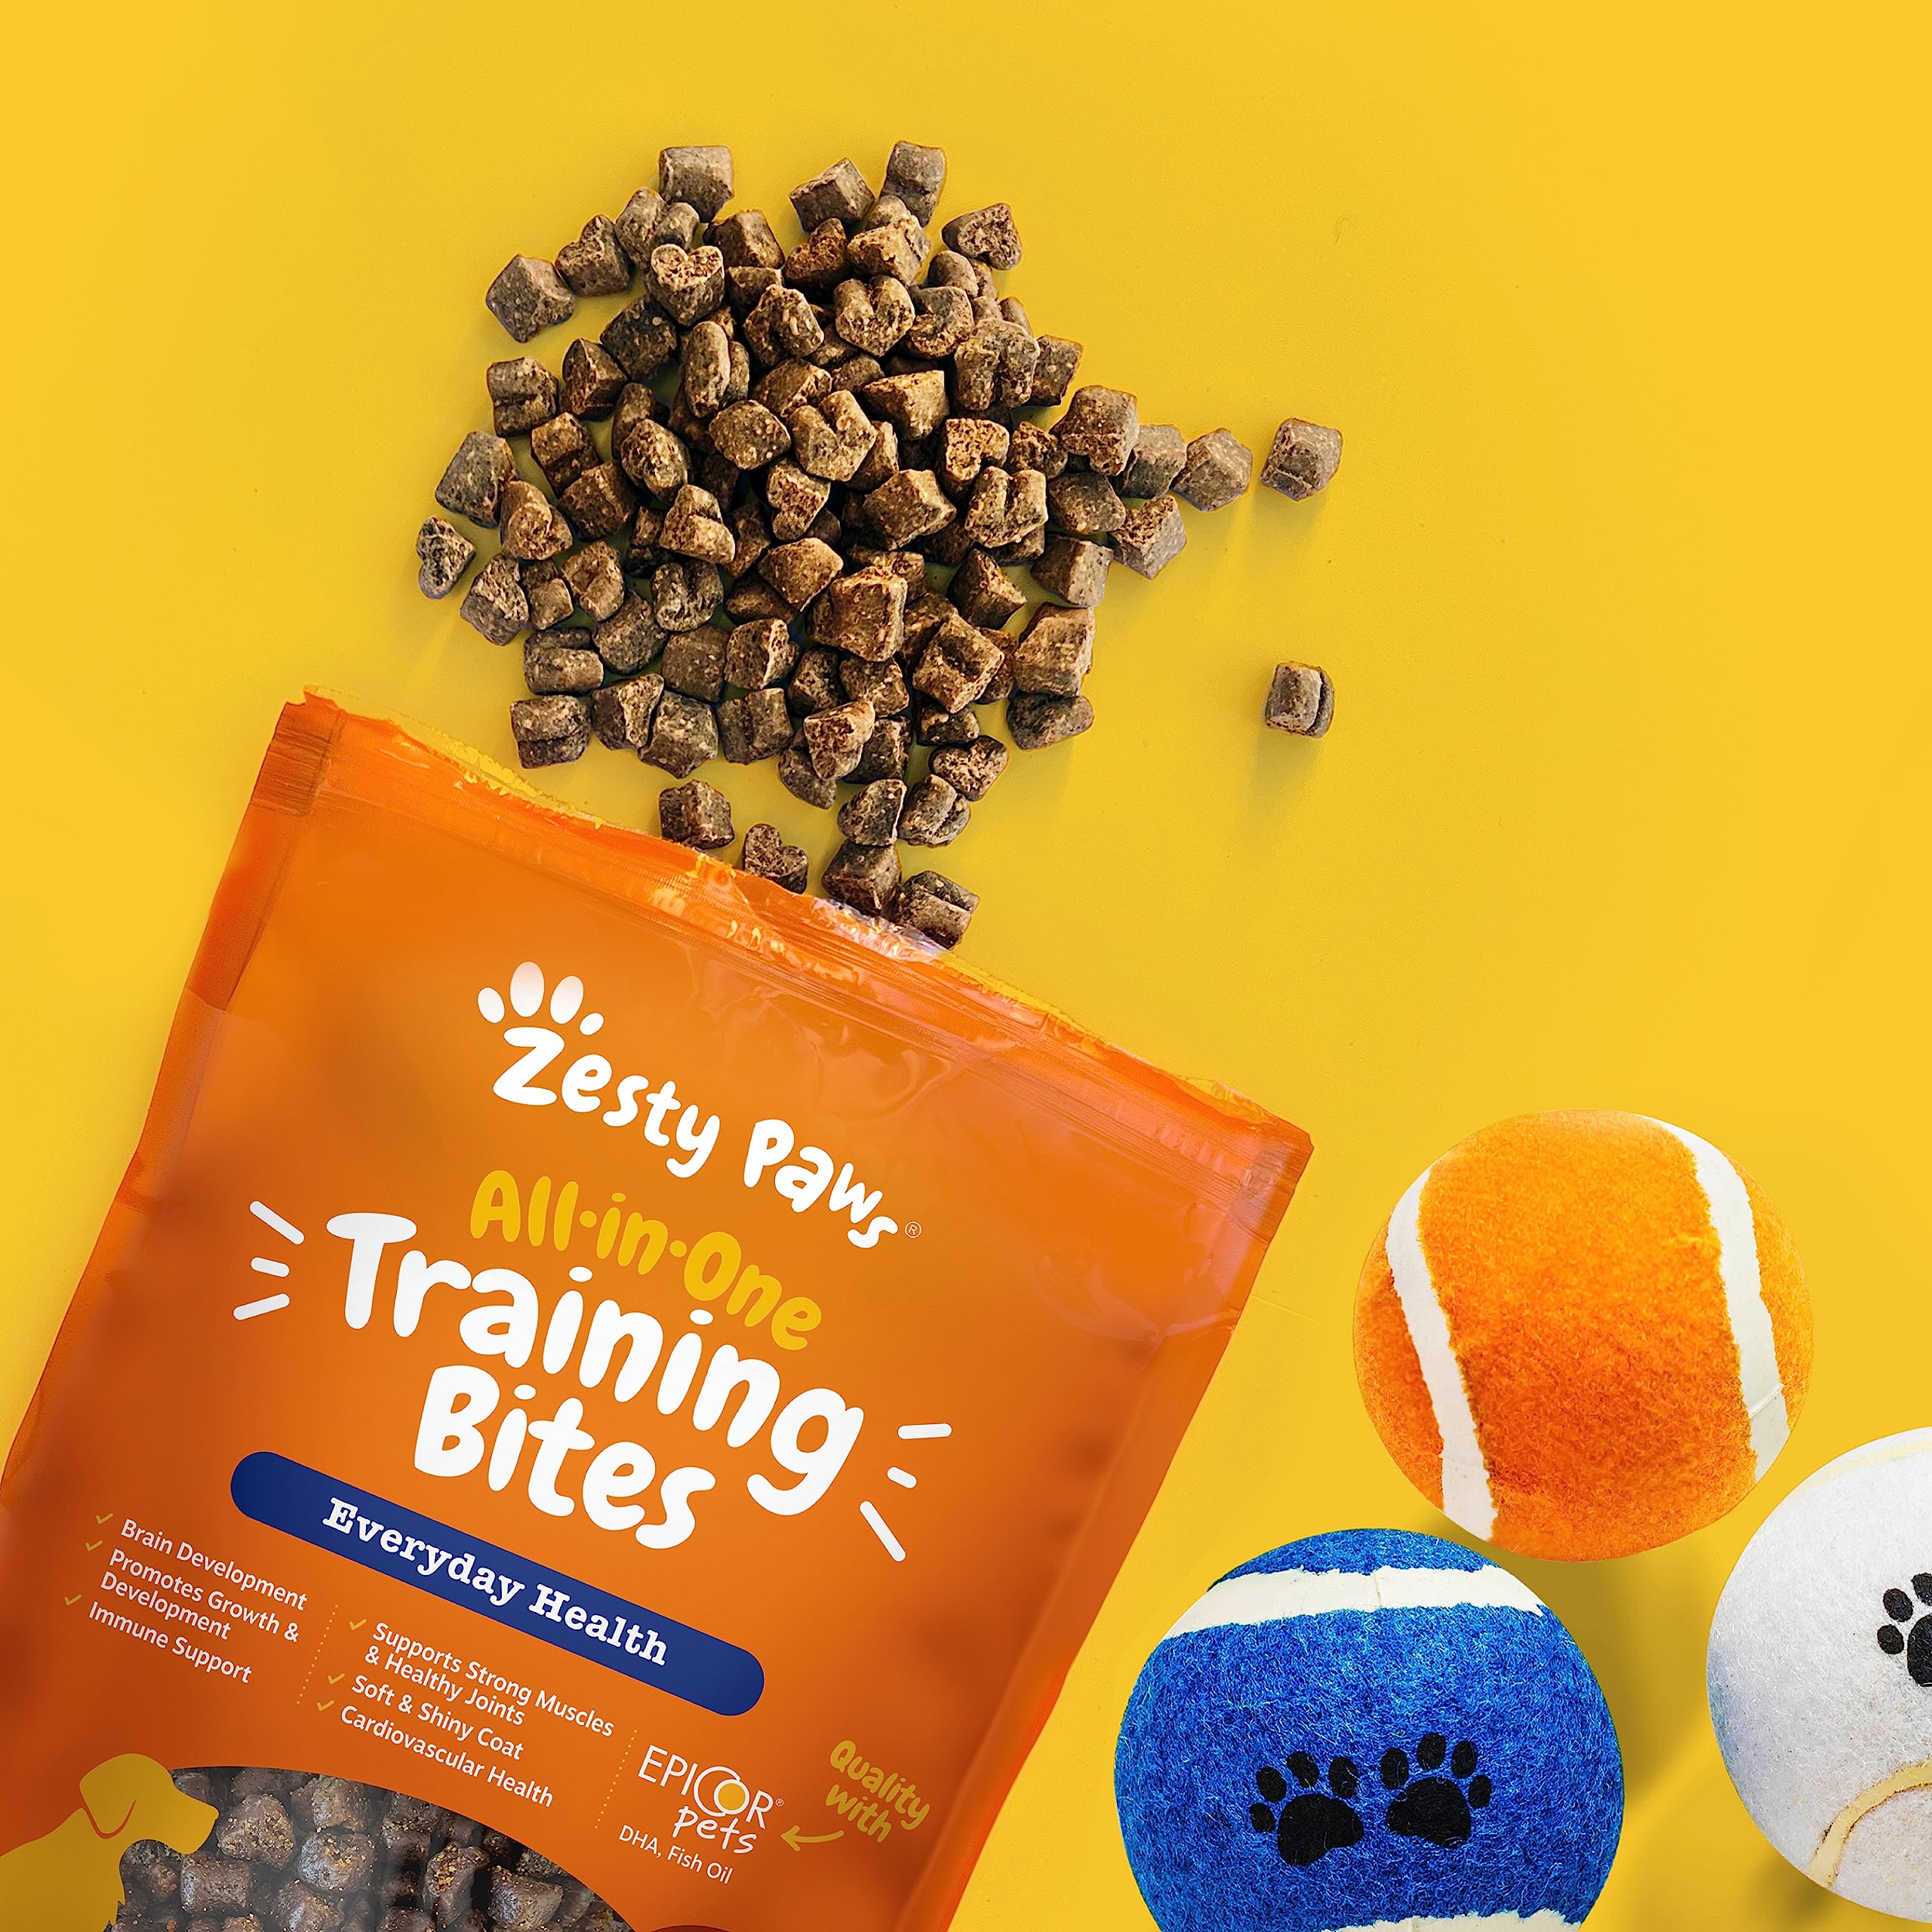 Zesty Paws All-in-1 Everyday Health Training Bites Peanut Butter Flavor Omega-3 Soft and Chewy Dog Treats - 8 Oz  